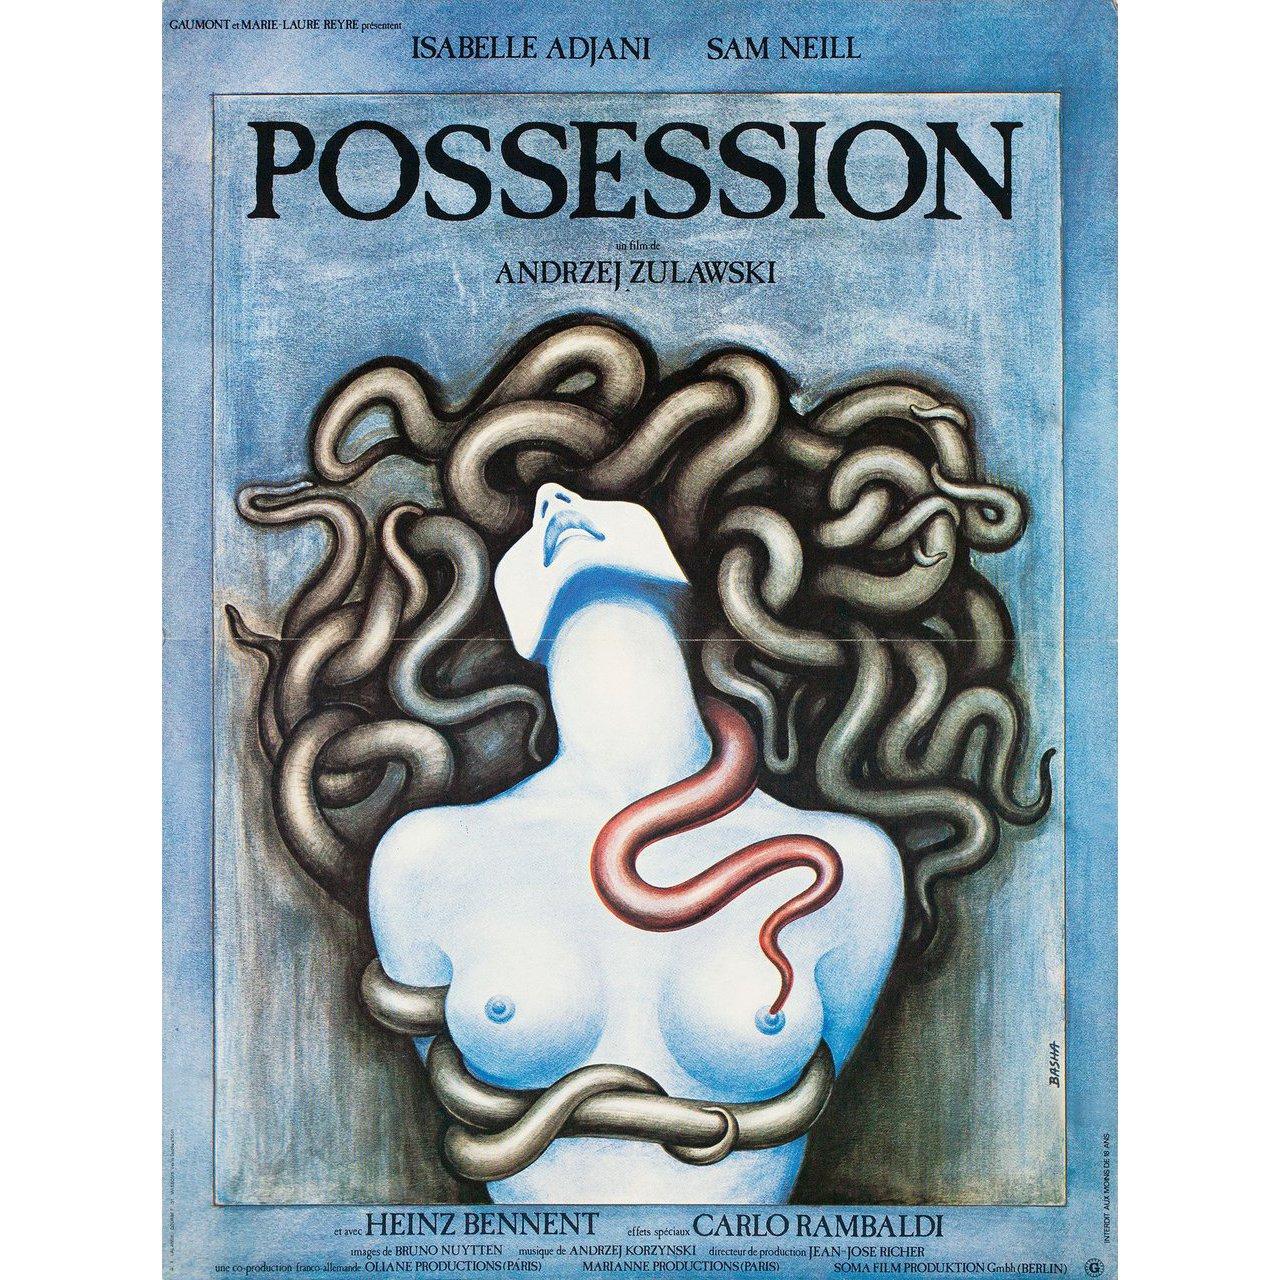 Original 1981 French petite poster by Barbara Baranowska for the film Possession directed by Andrzej Zulawski with Isabelle Adjani / Sam Neill / Margit Carstensen / Heinz Bennent. Very Good-Fine condition, folded. Many original posters were issued